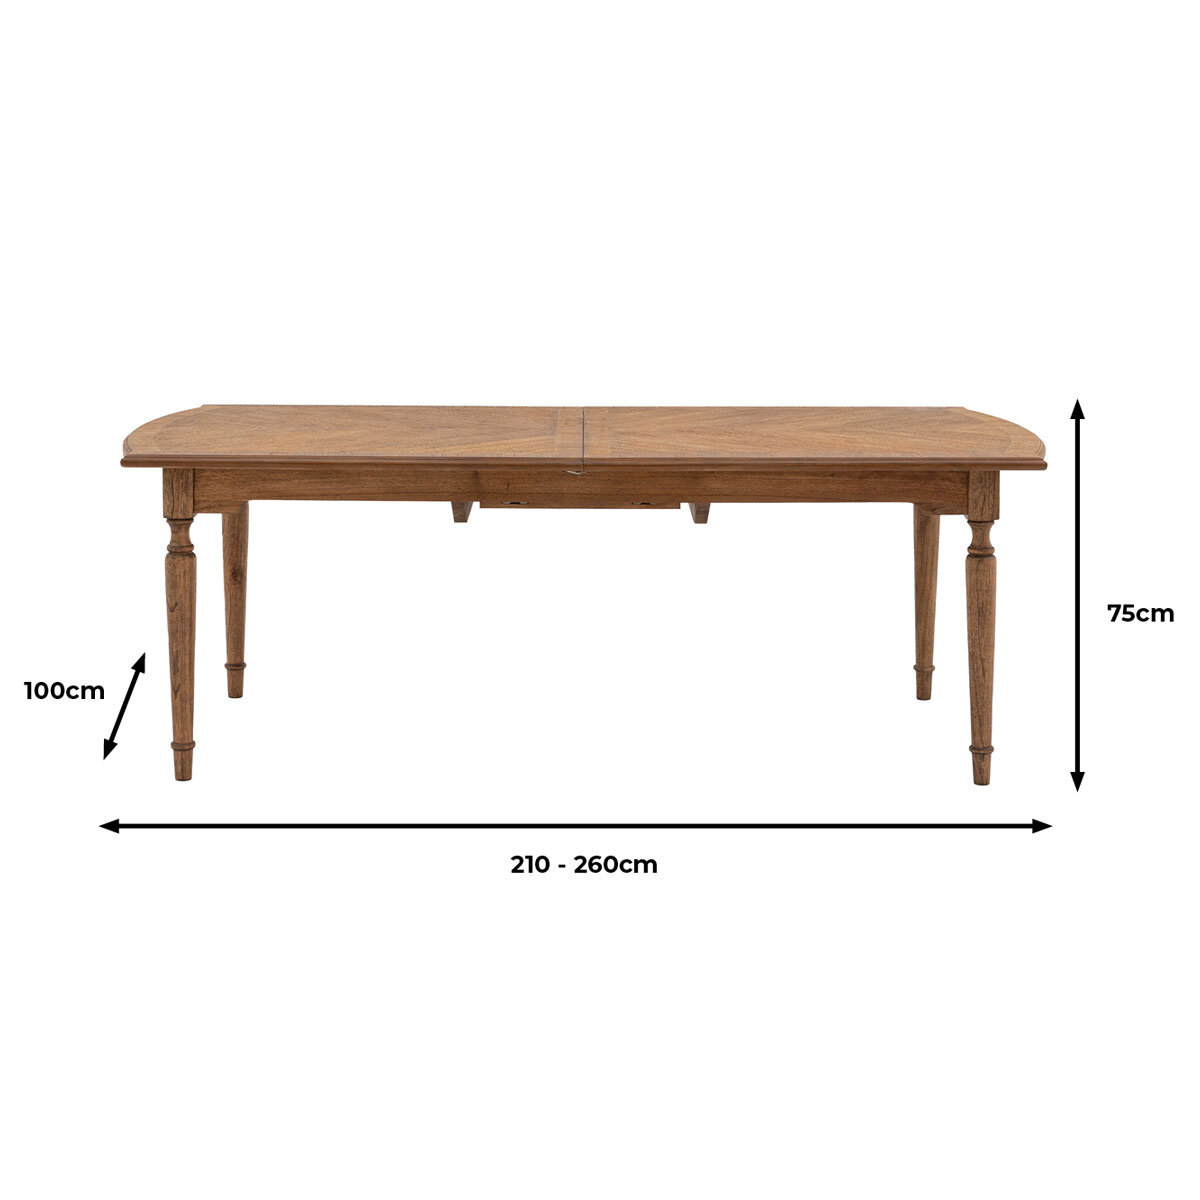 Gallery Highgrove Extending Dining Table, Seats 6-8